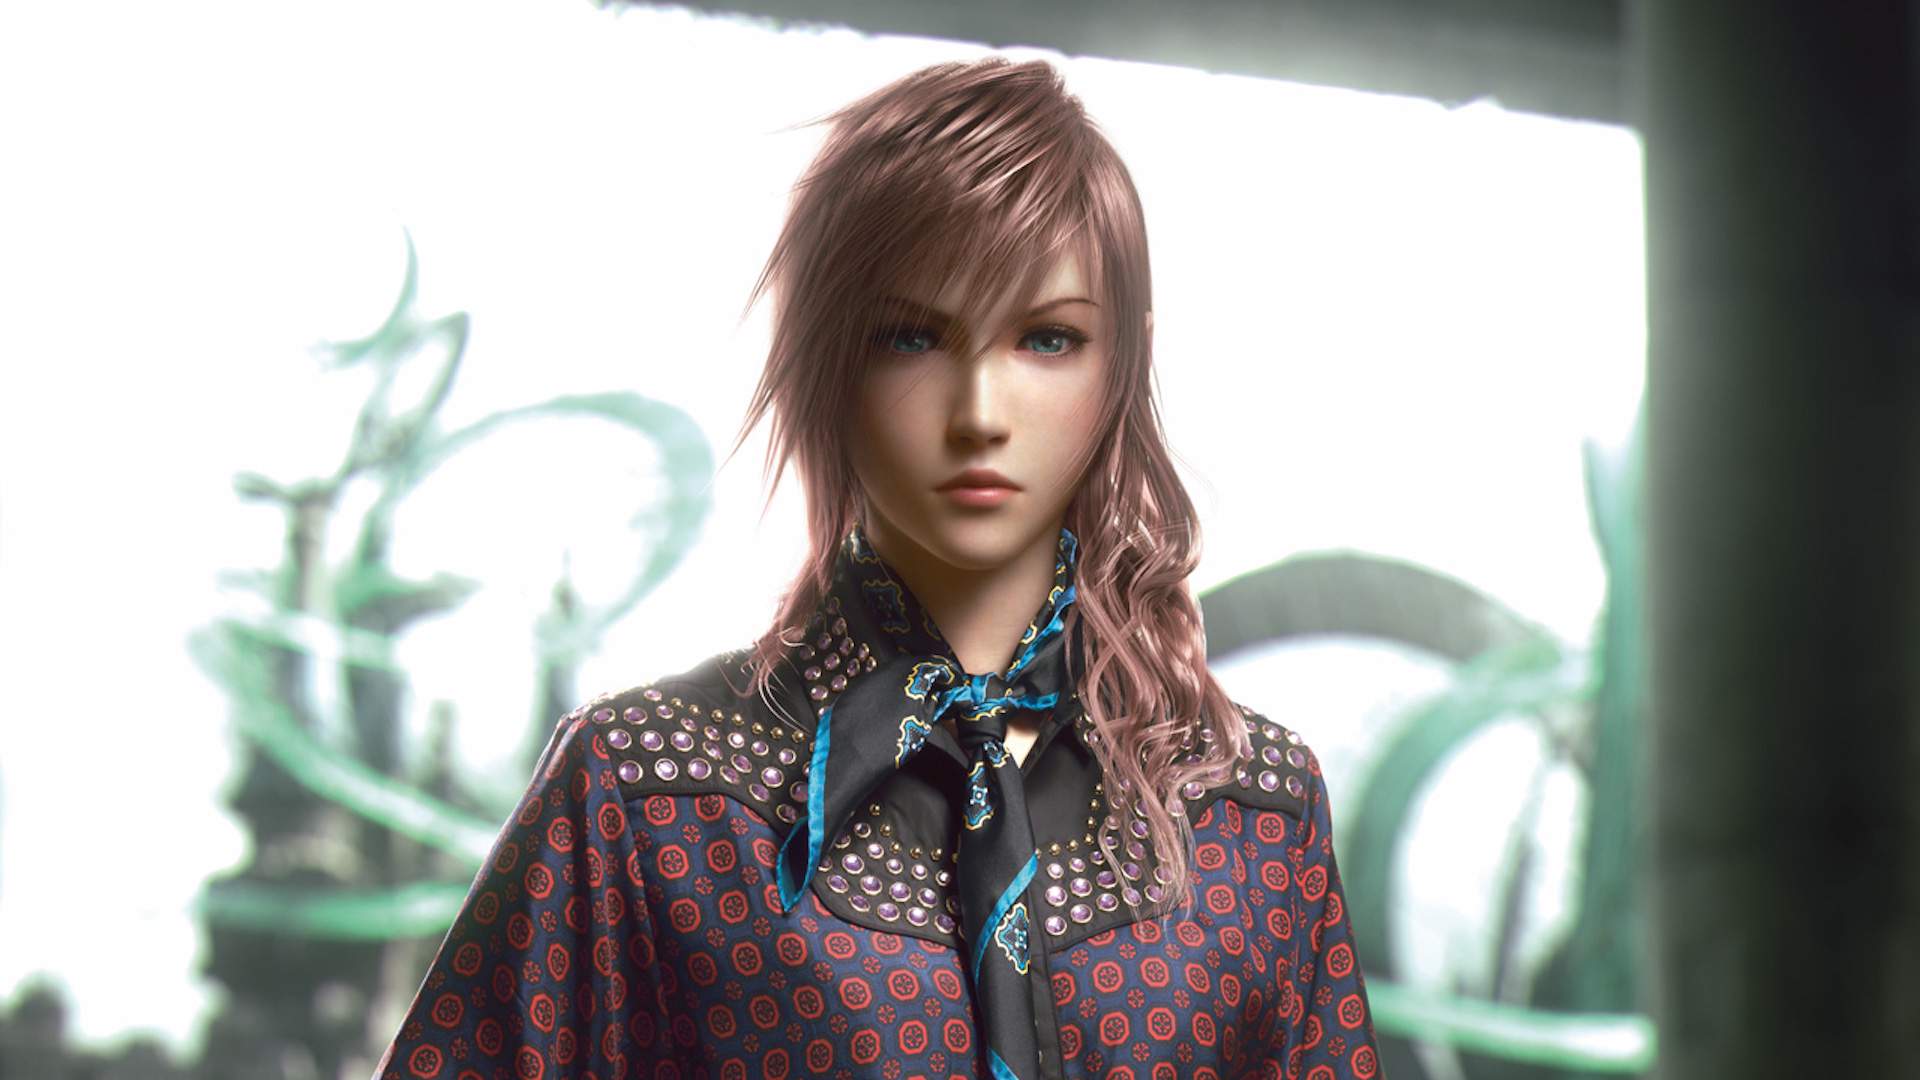 FINAL FANTASY Characters to Showcase Prada 2012 Men's Spring/Summer  Collection